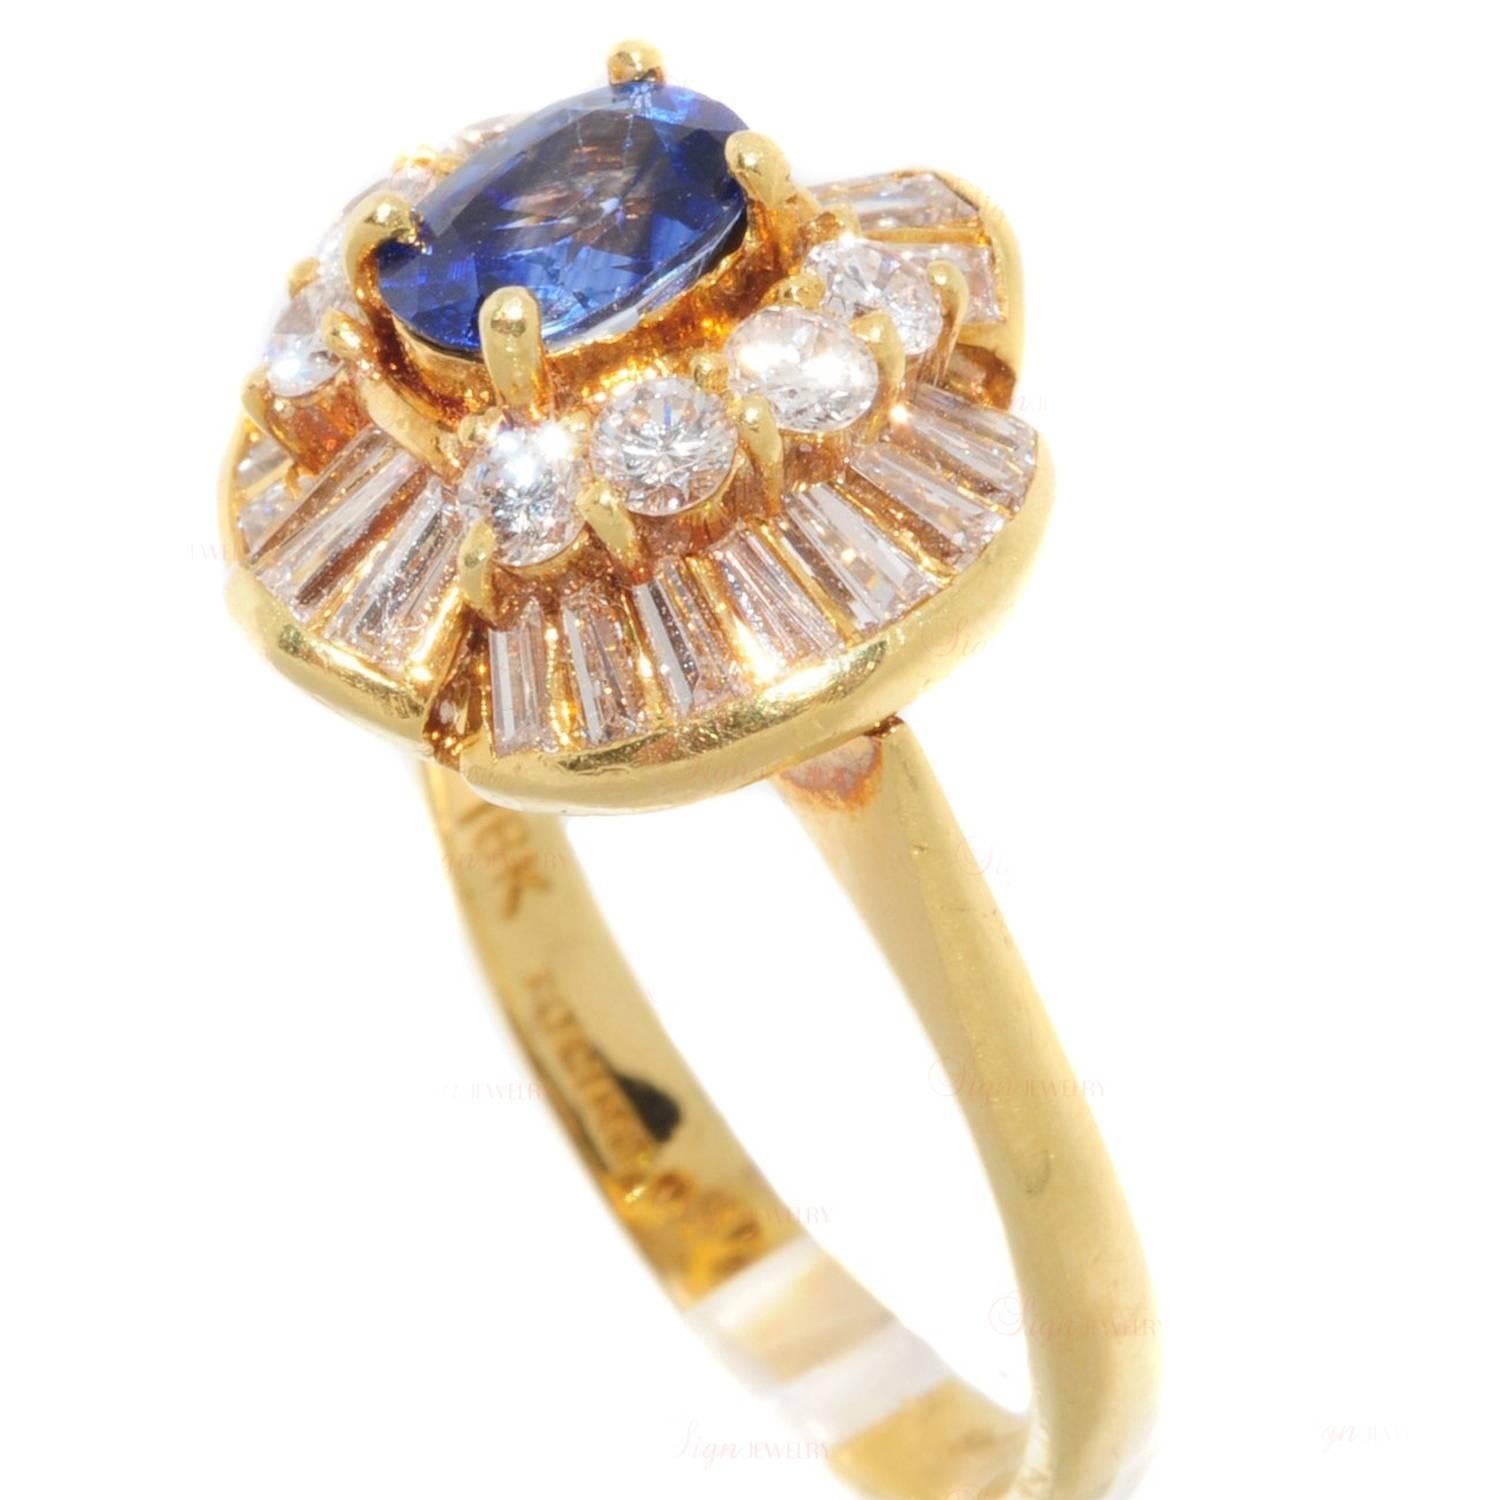 This radiant cocktail ring was made in 1980s and features a beautiful crown with a prong-set a natural blue sapphire encircled by diamonds, all set in 18k yellow gold. Measurements: 0.59